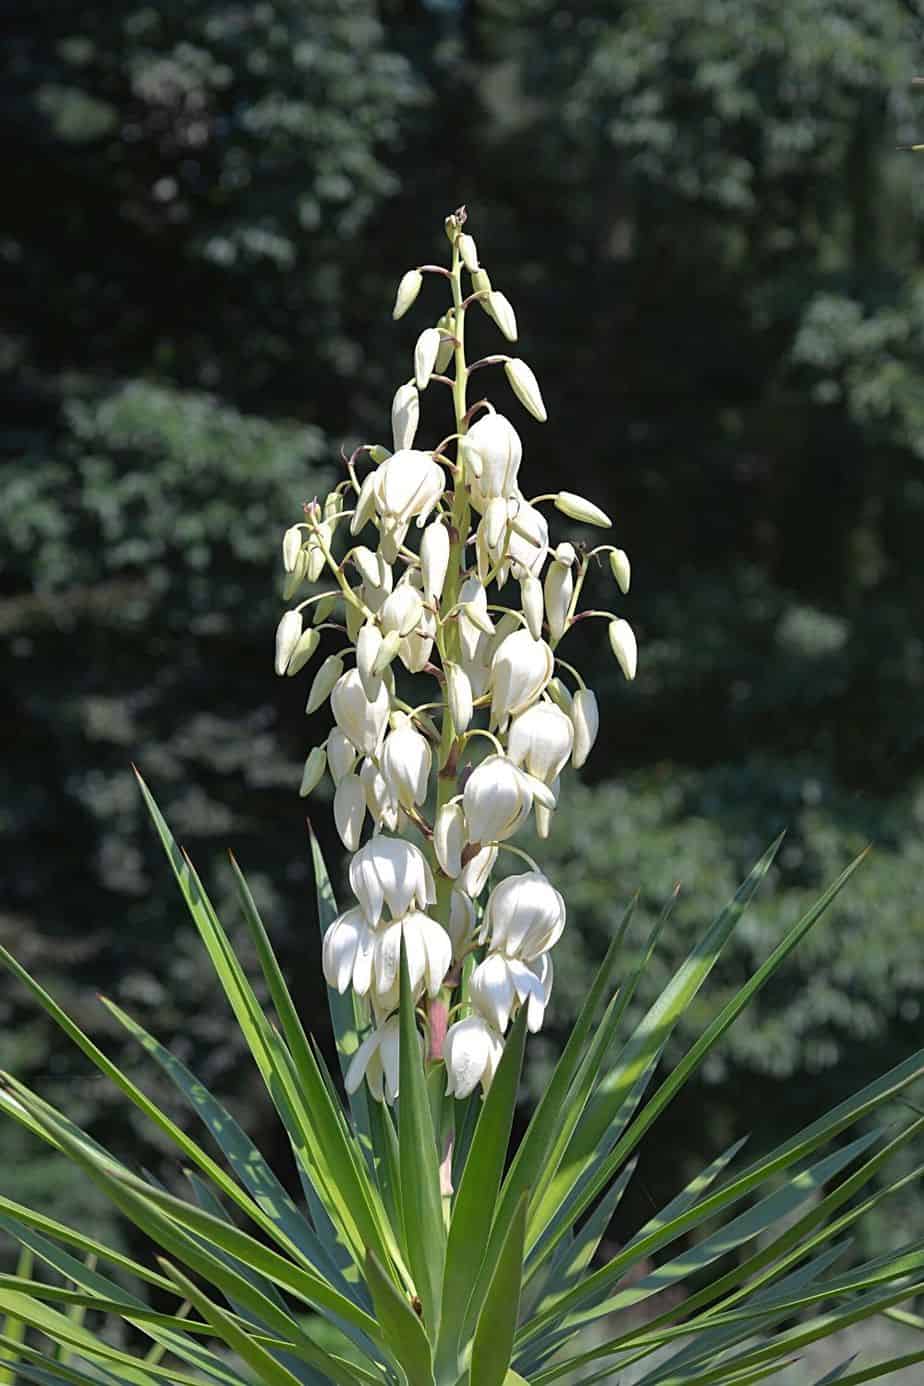 Spanish Bayonet is known for its bell-shaped, drop down, and six-parted blooms, hence, a great addition to your southwest facing garden collection